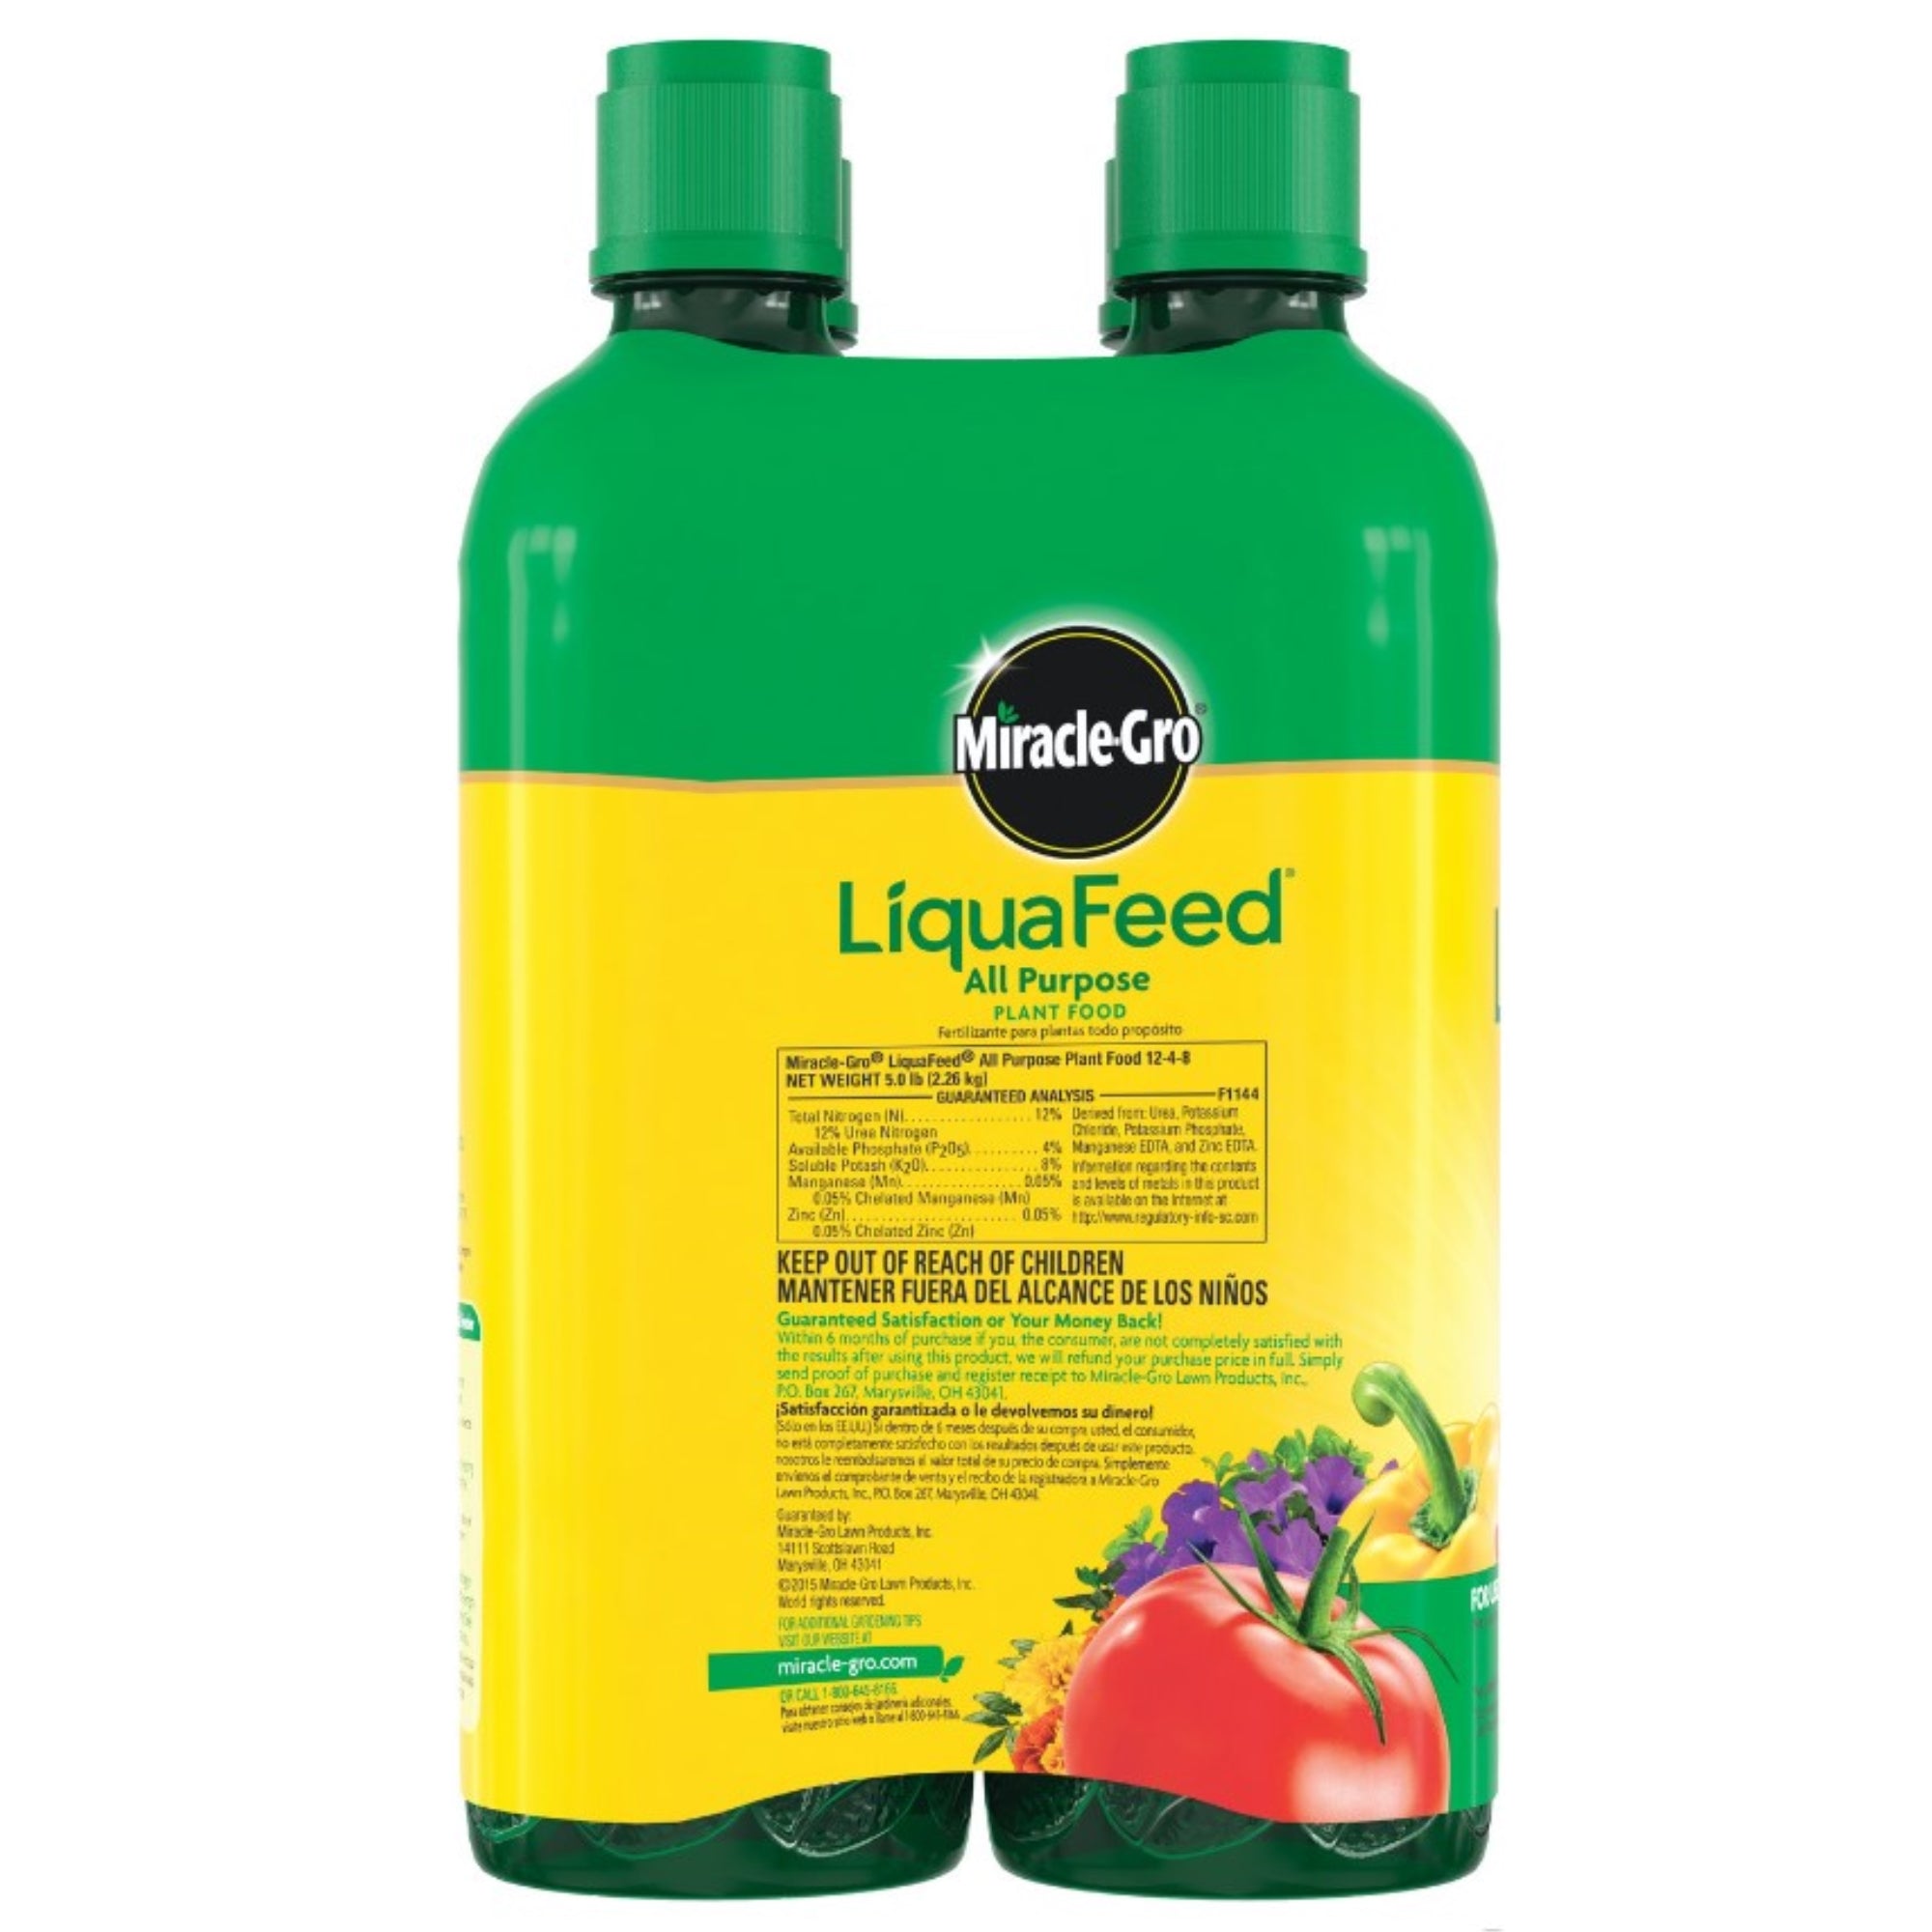 Miracle-Gro Liquafeed All Purpose Plant Food, 16 oz, 4 Pack